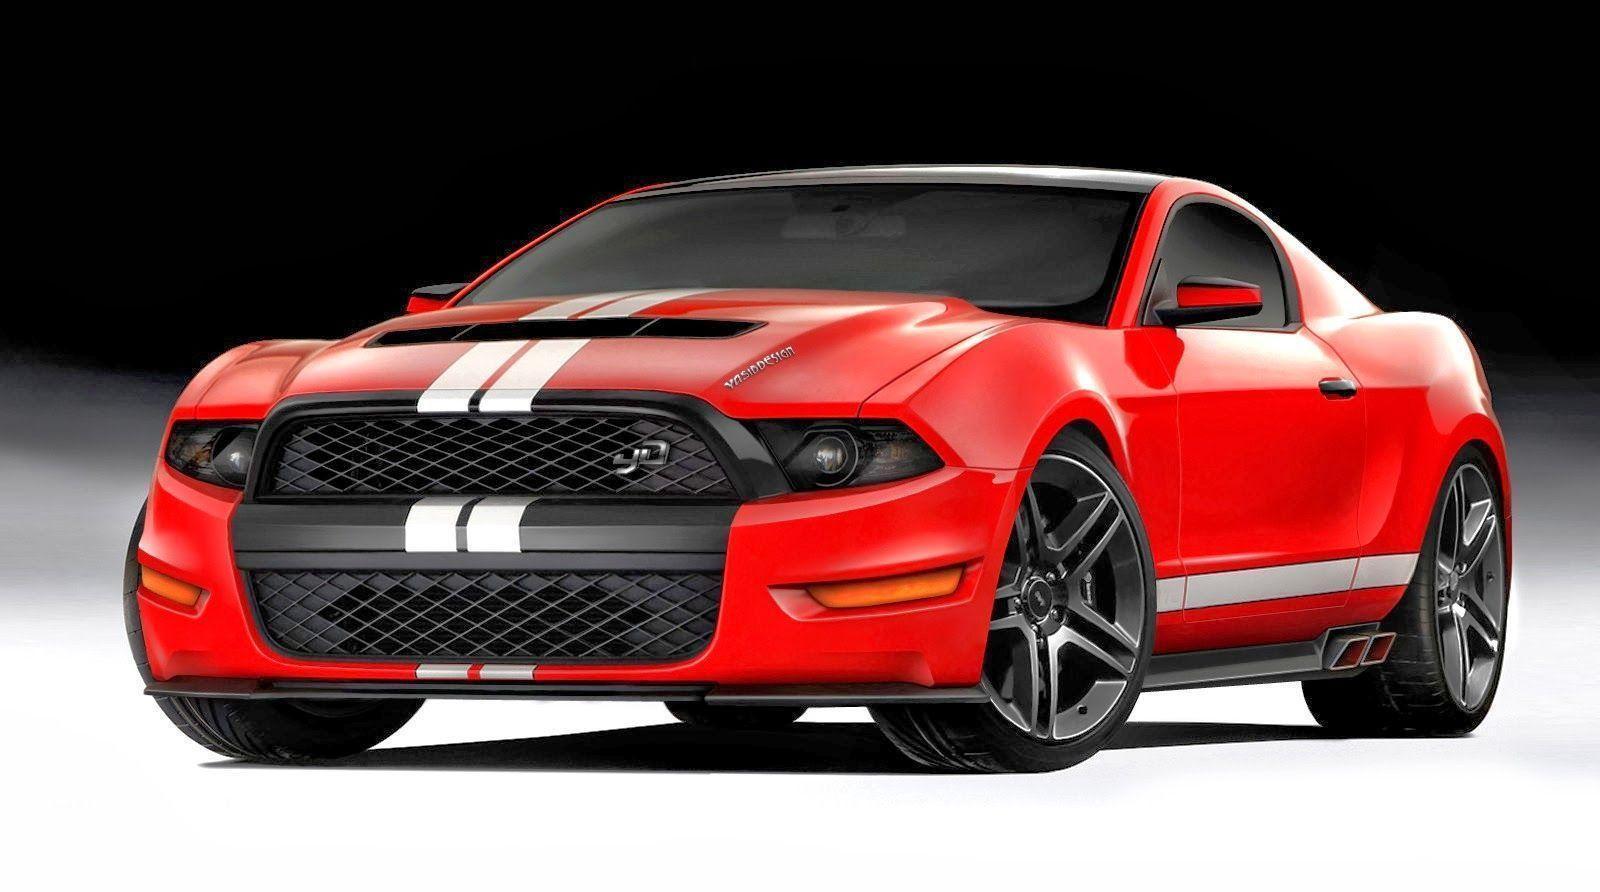 Ford Mustang Shelby GT500 Concept HD Wallpaper. Car